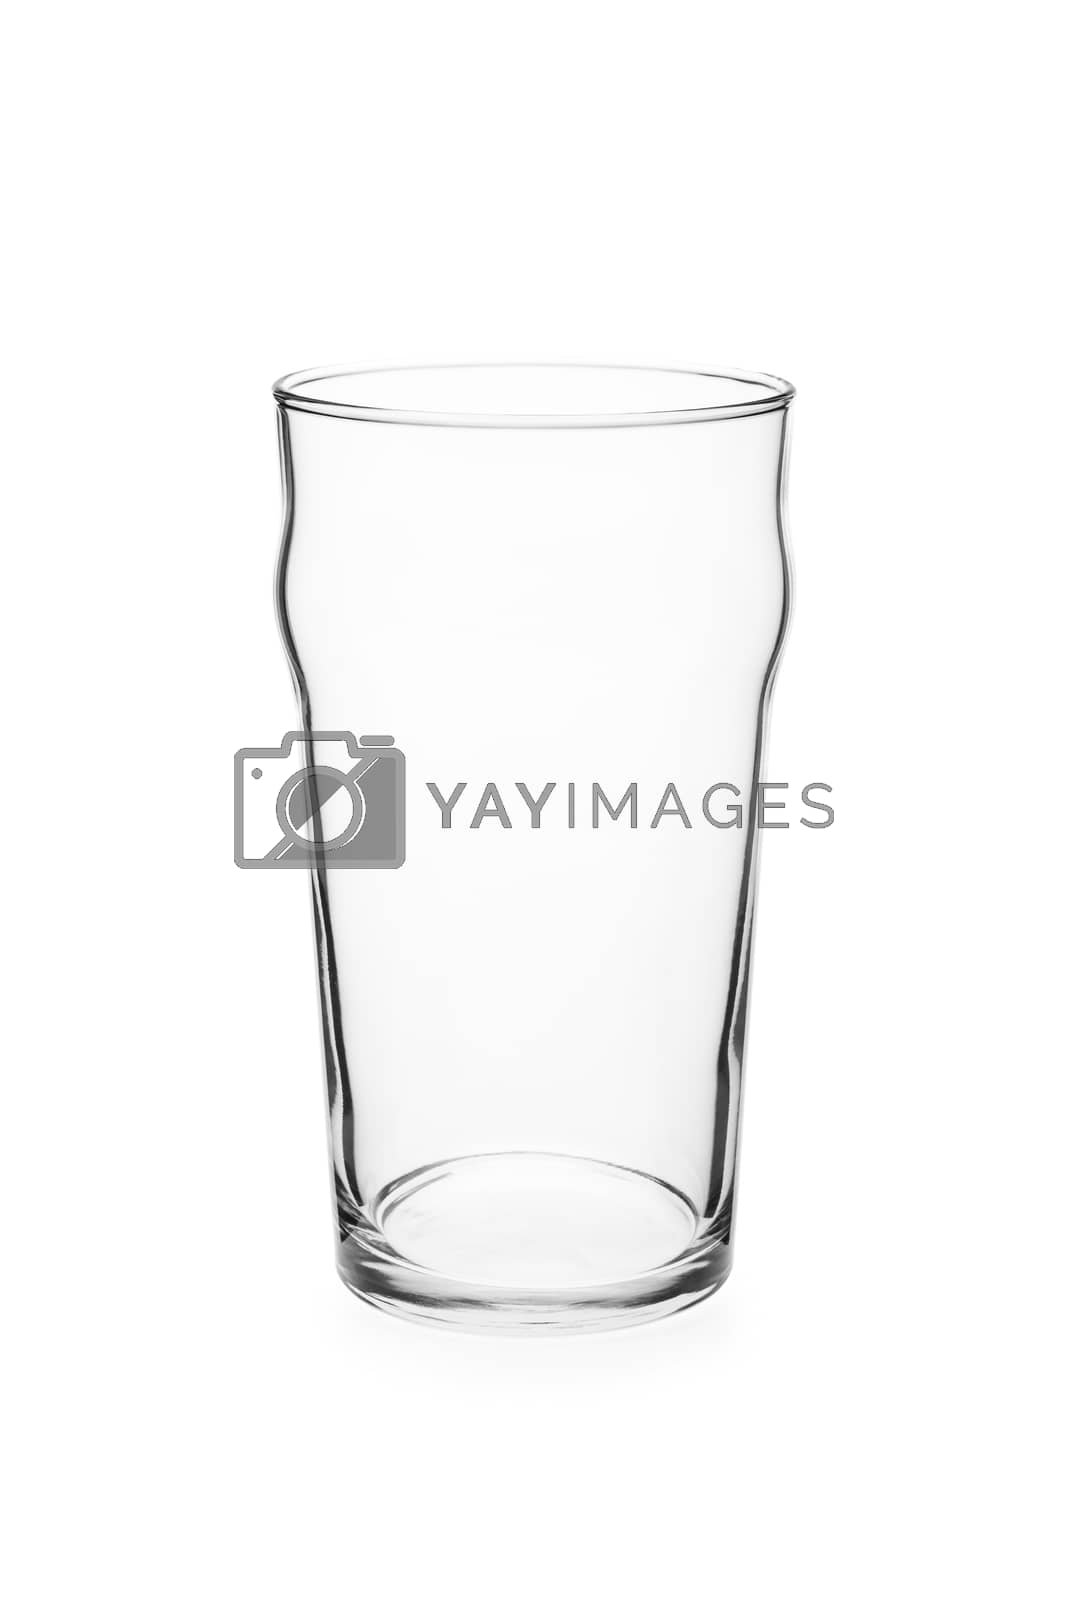 Royalty free image of Empty English Pint Glass by patrickstock